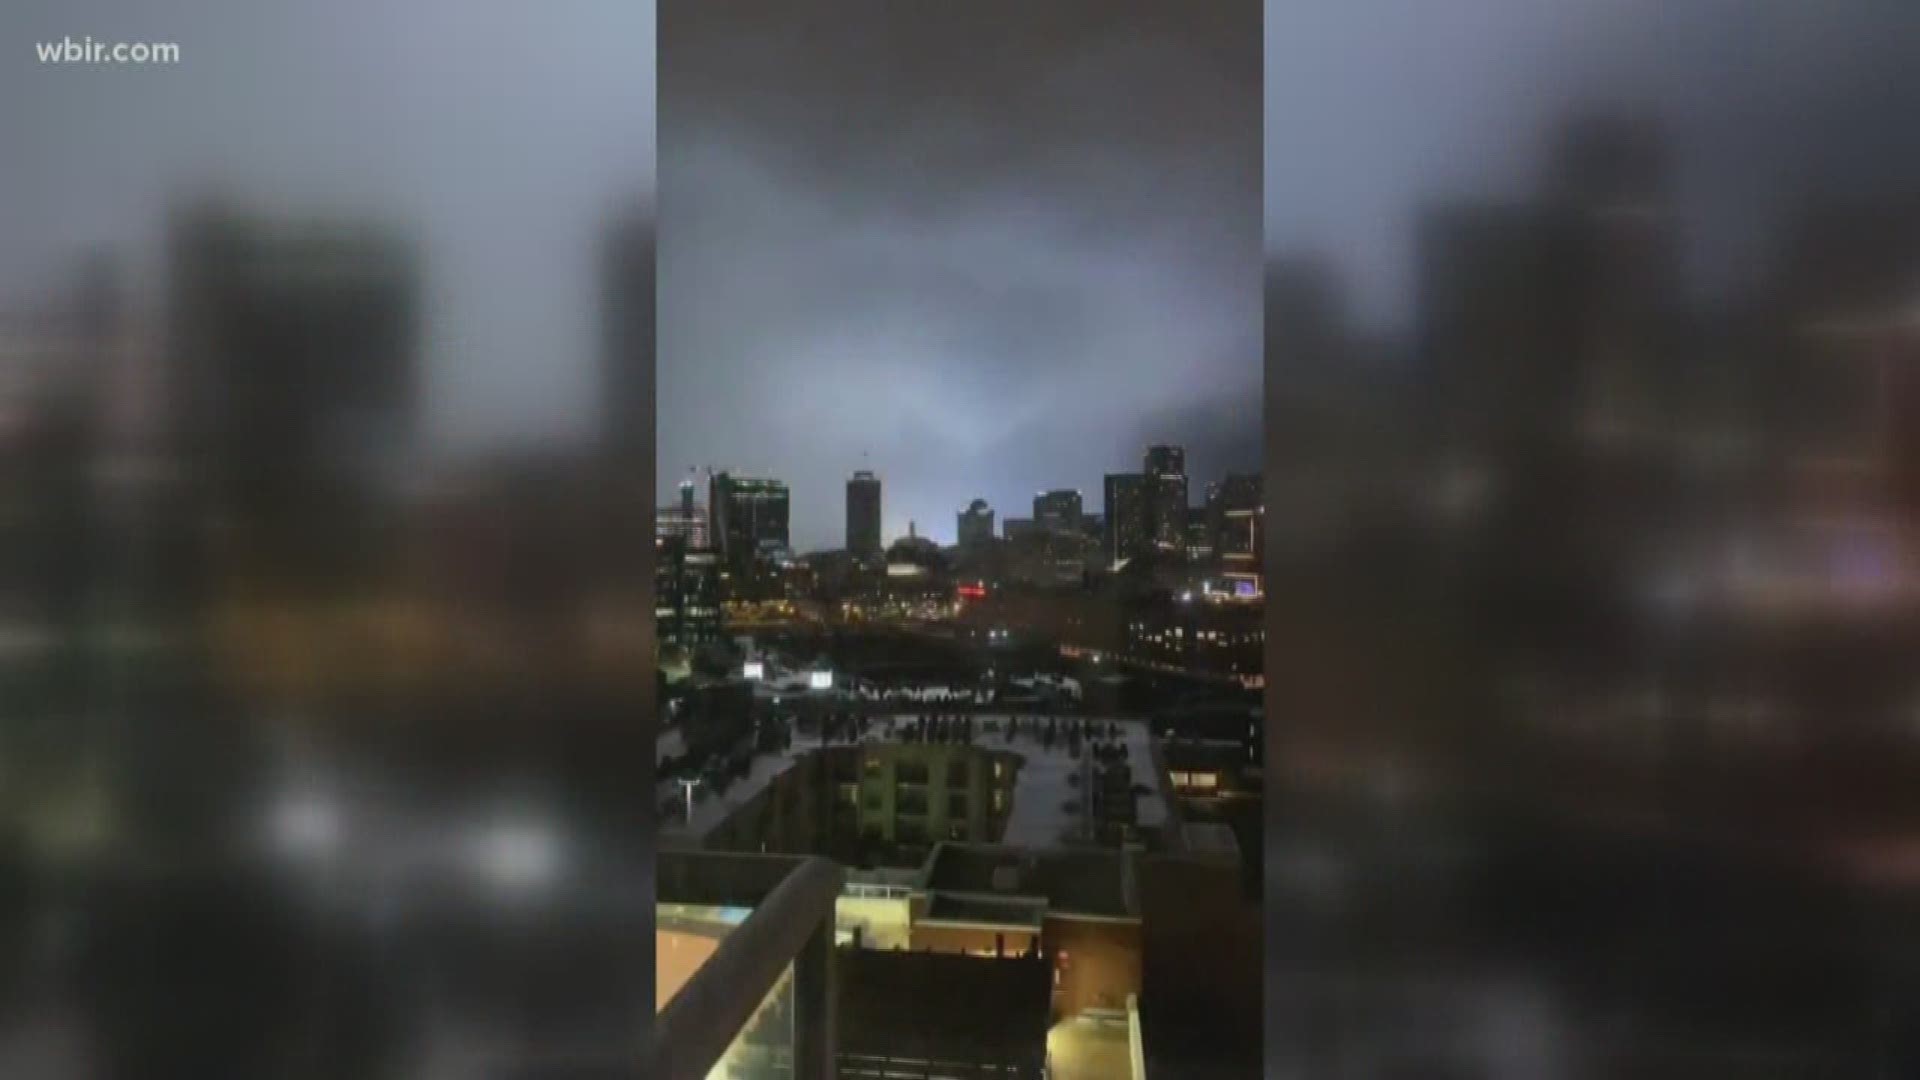 A tornado moved across downtown Nashville, destroying at least 40 buildings and devastating the areas.